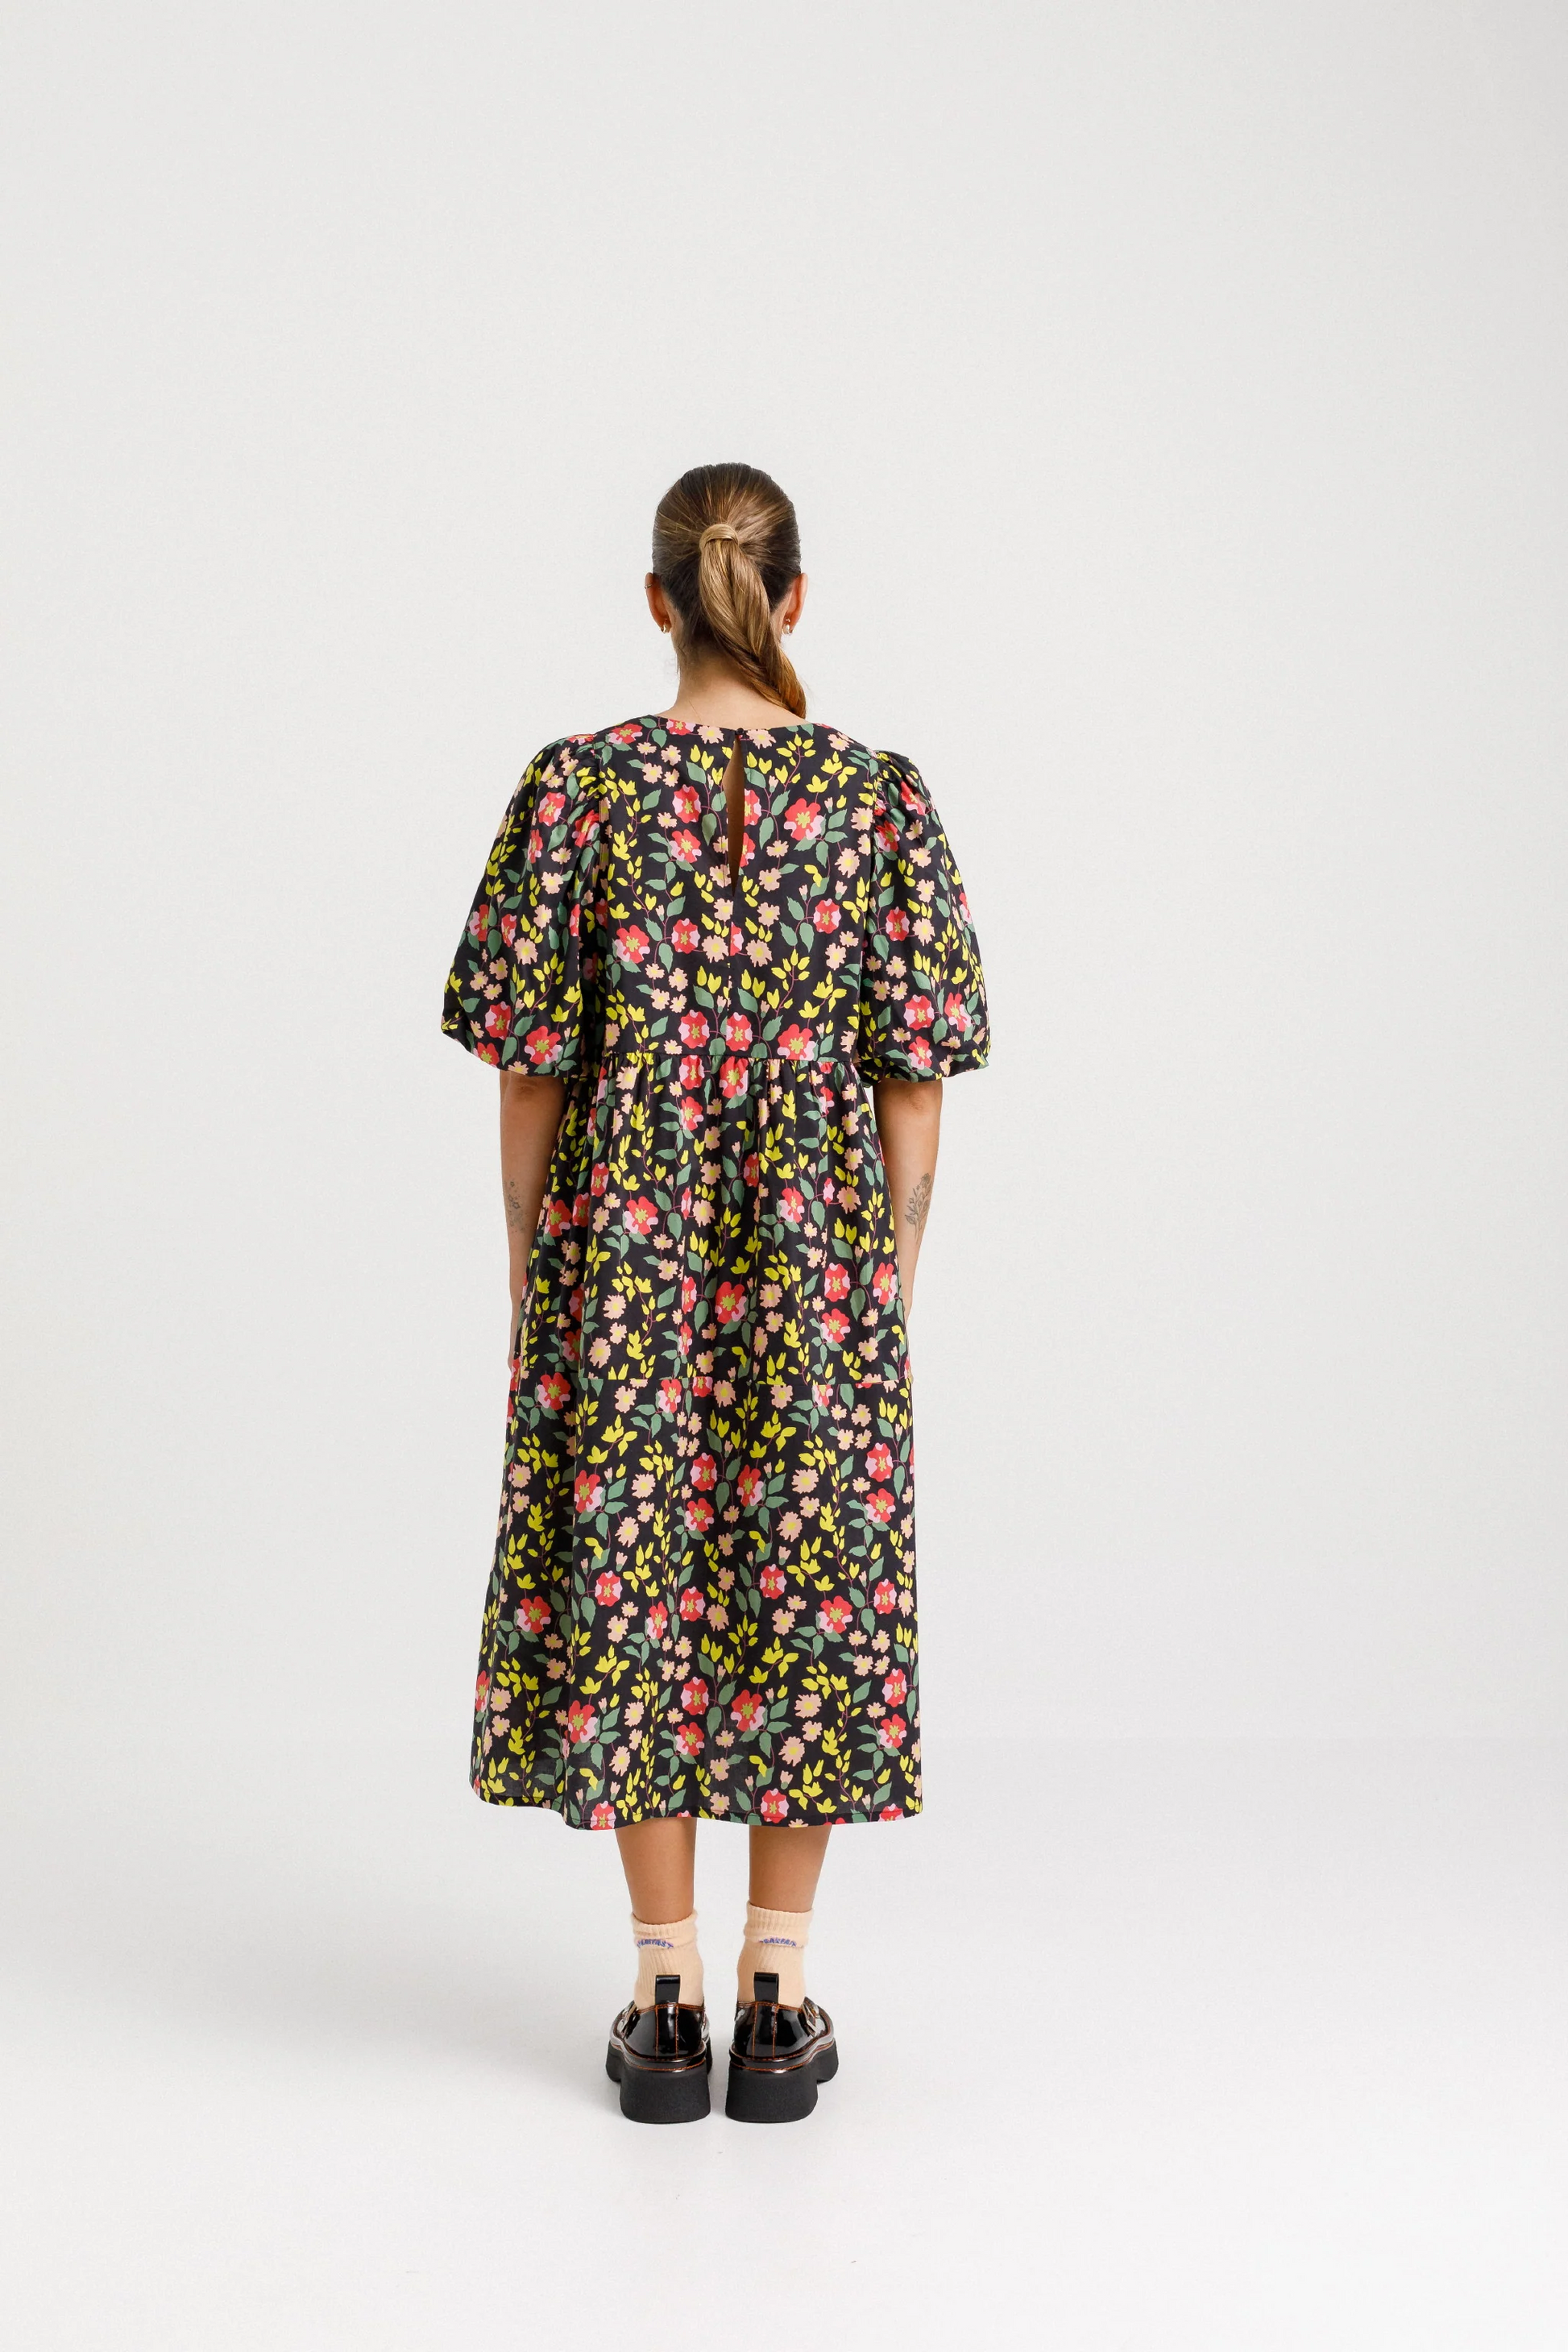 THING THING LEA DRESS - BOUQUET - THE VOGUE STORE